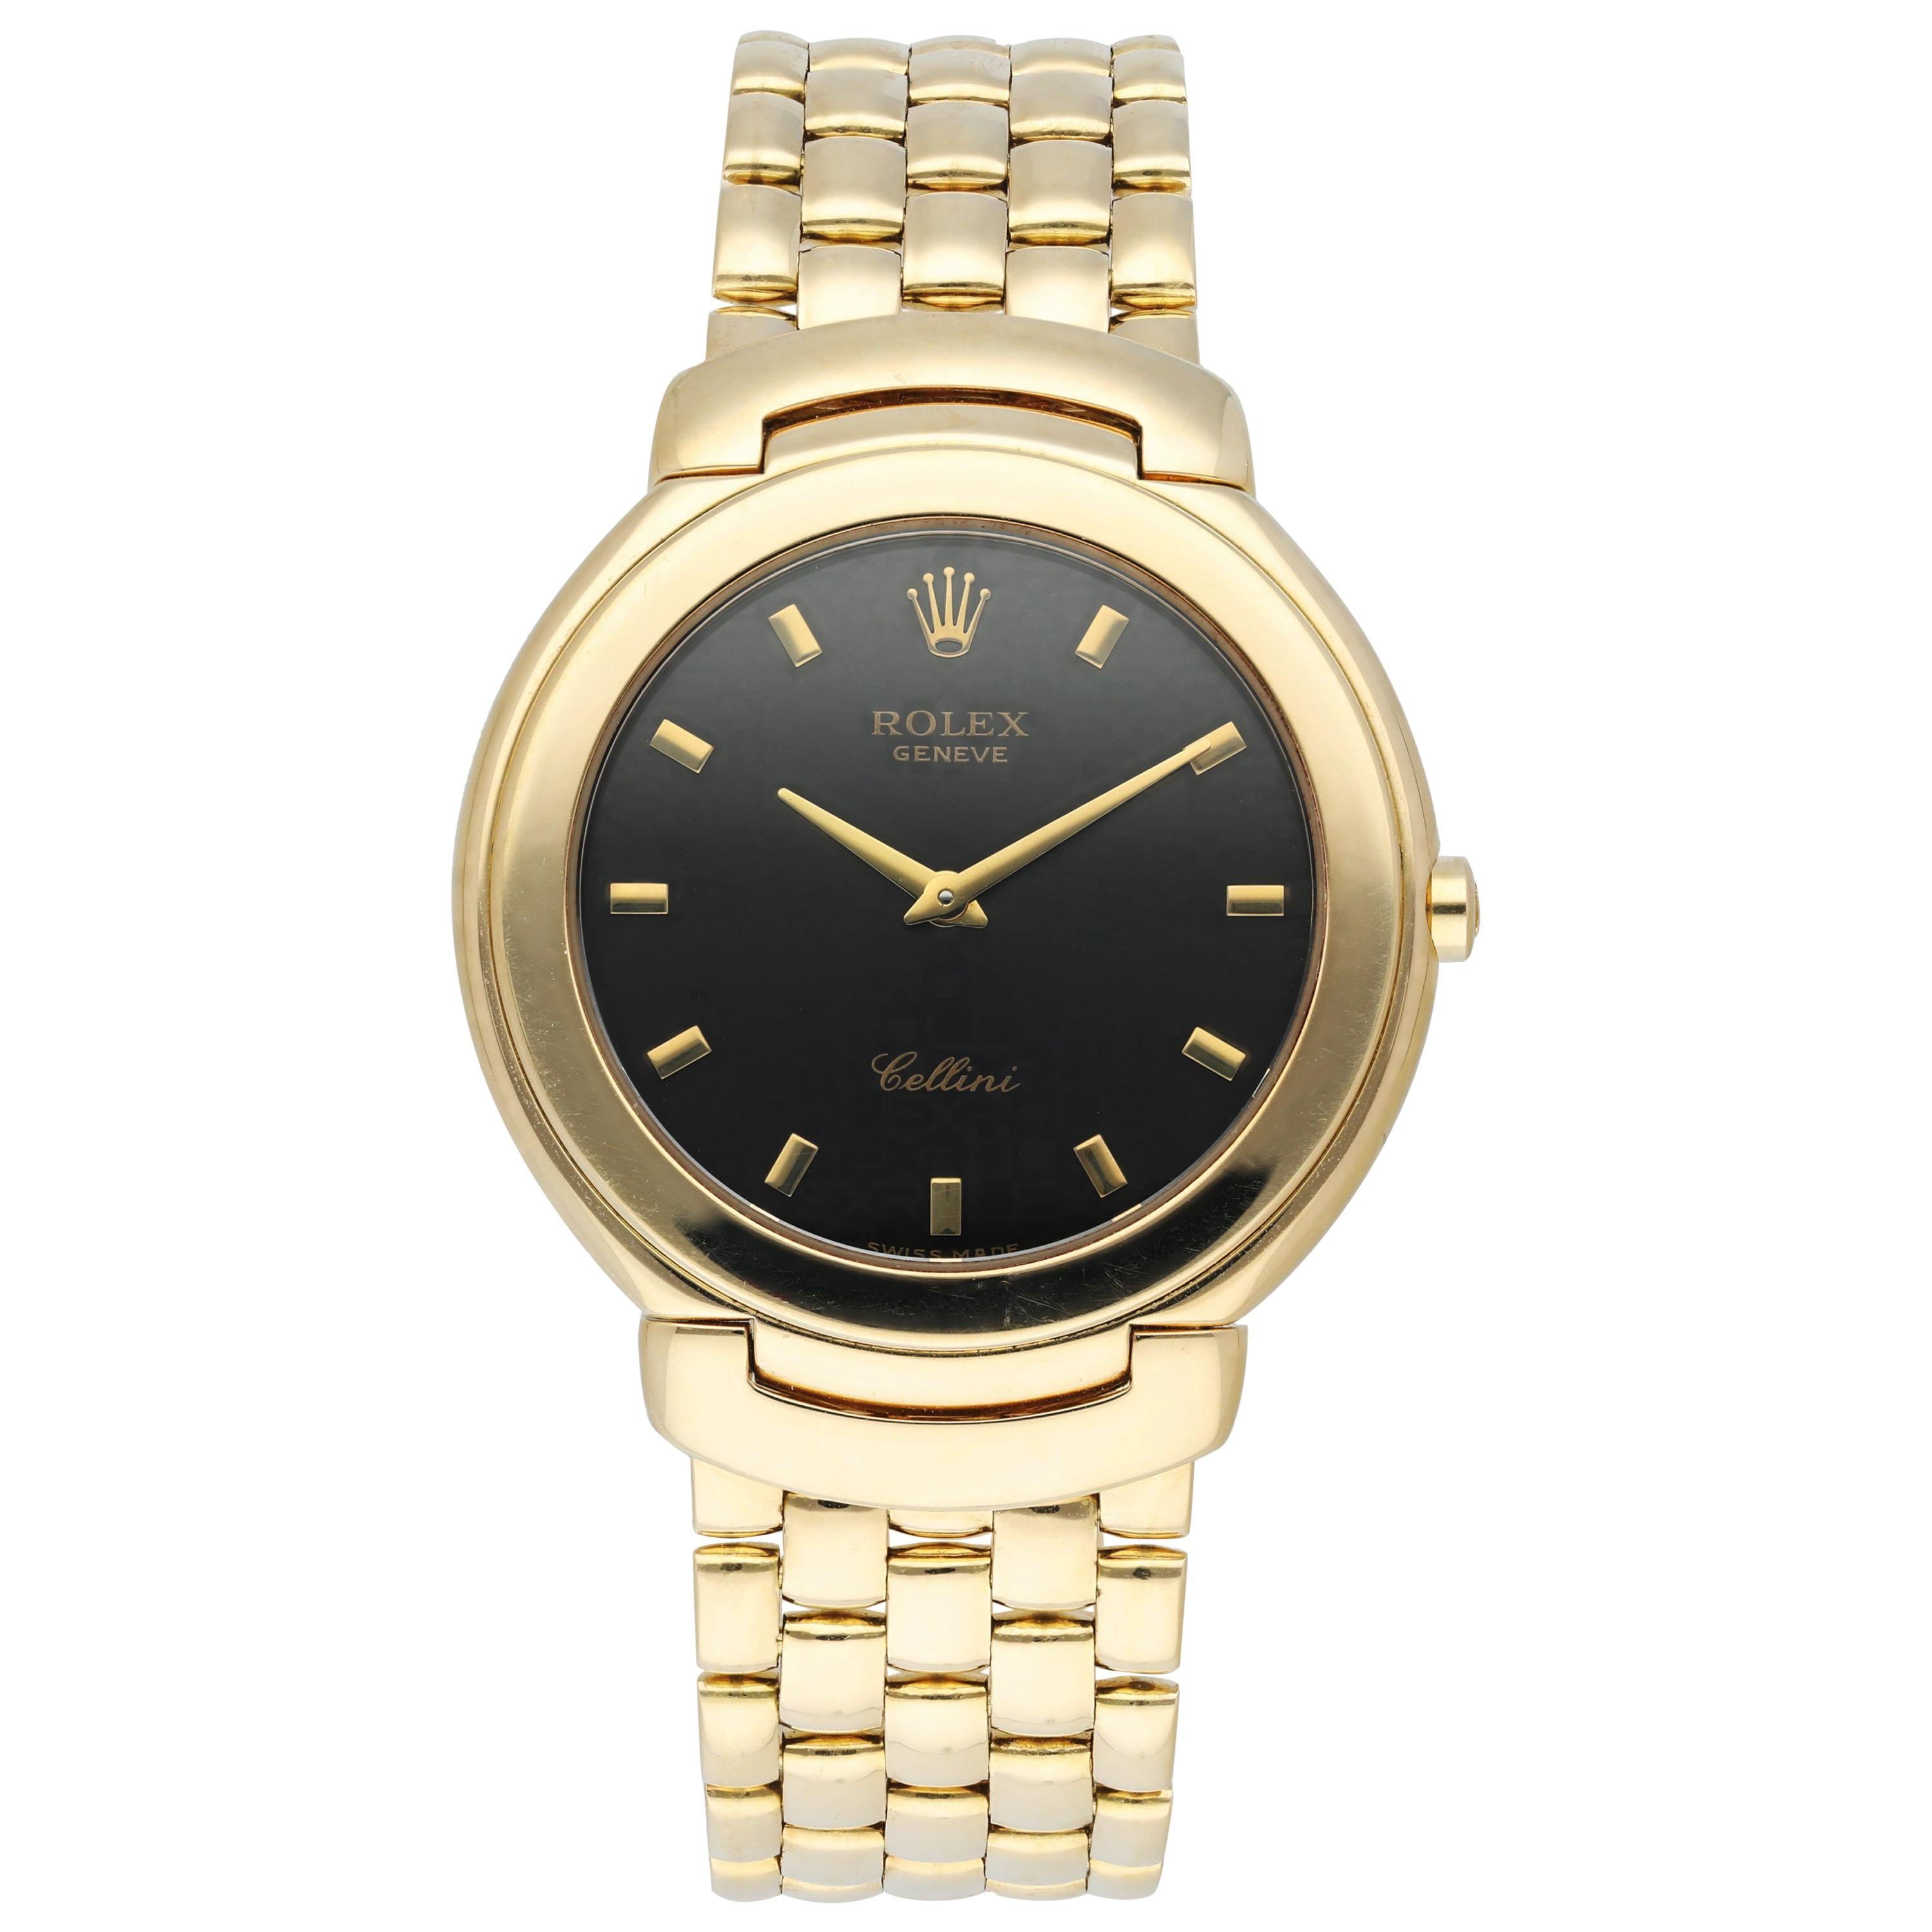 Rolex Cellini 6623 Yellow Gold Men's Watch For Sale